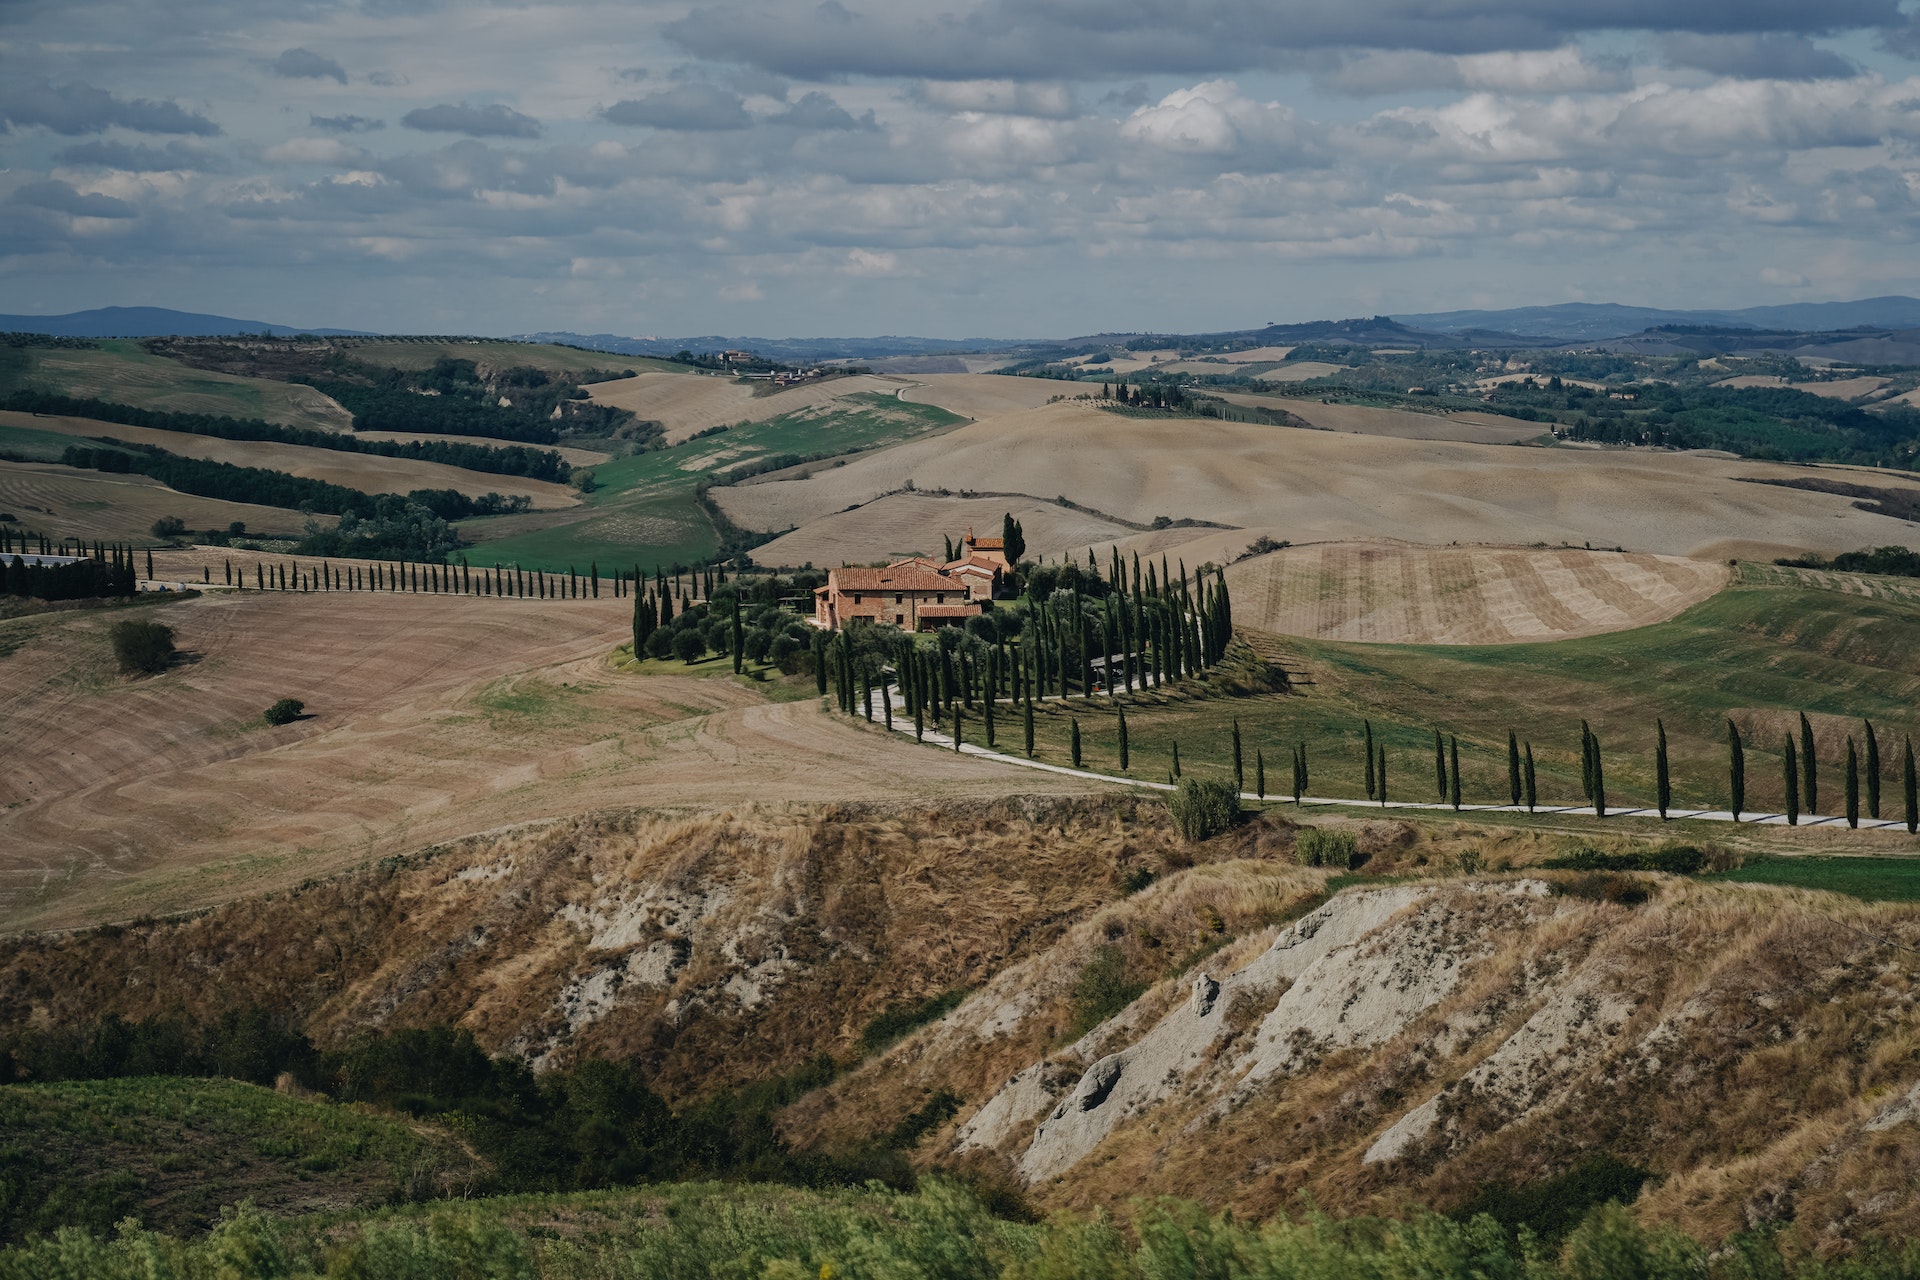 Farm Stays In Tuscany - Experience The Beauty Of The Countryside